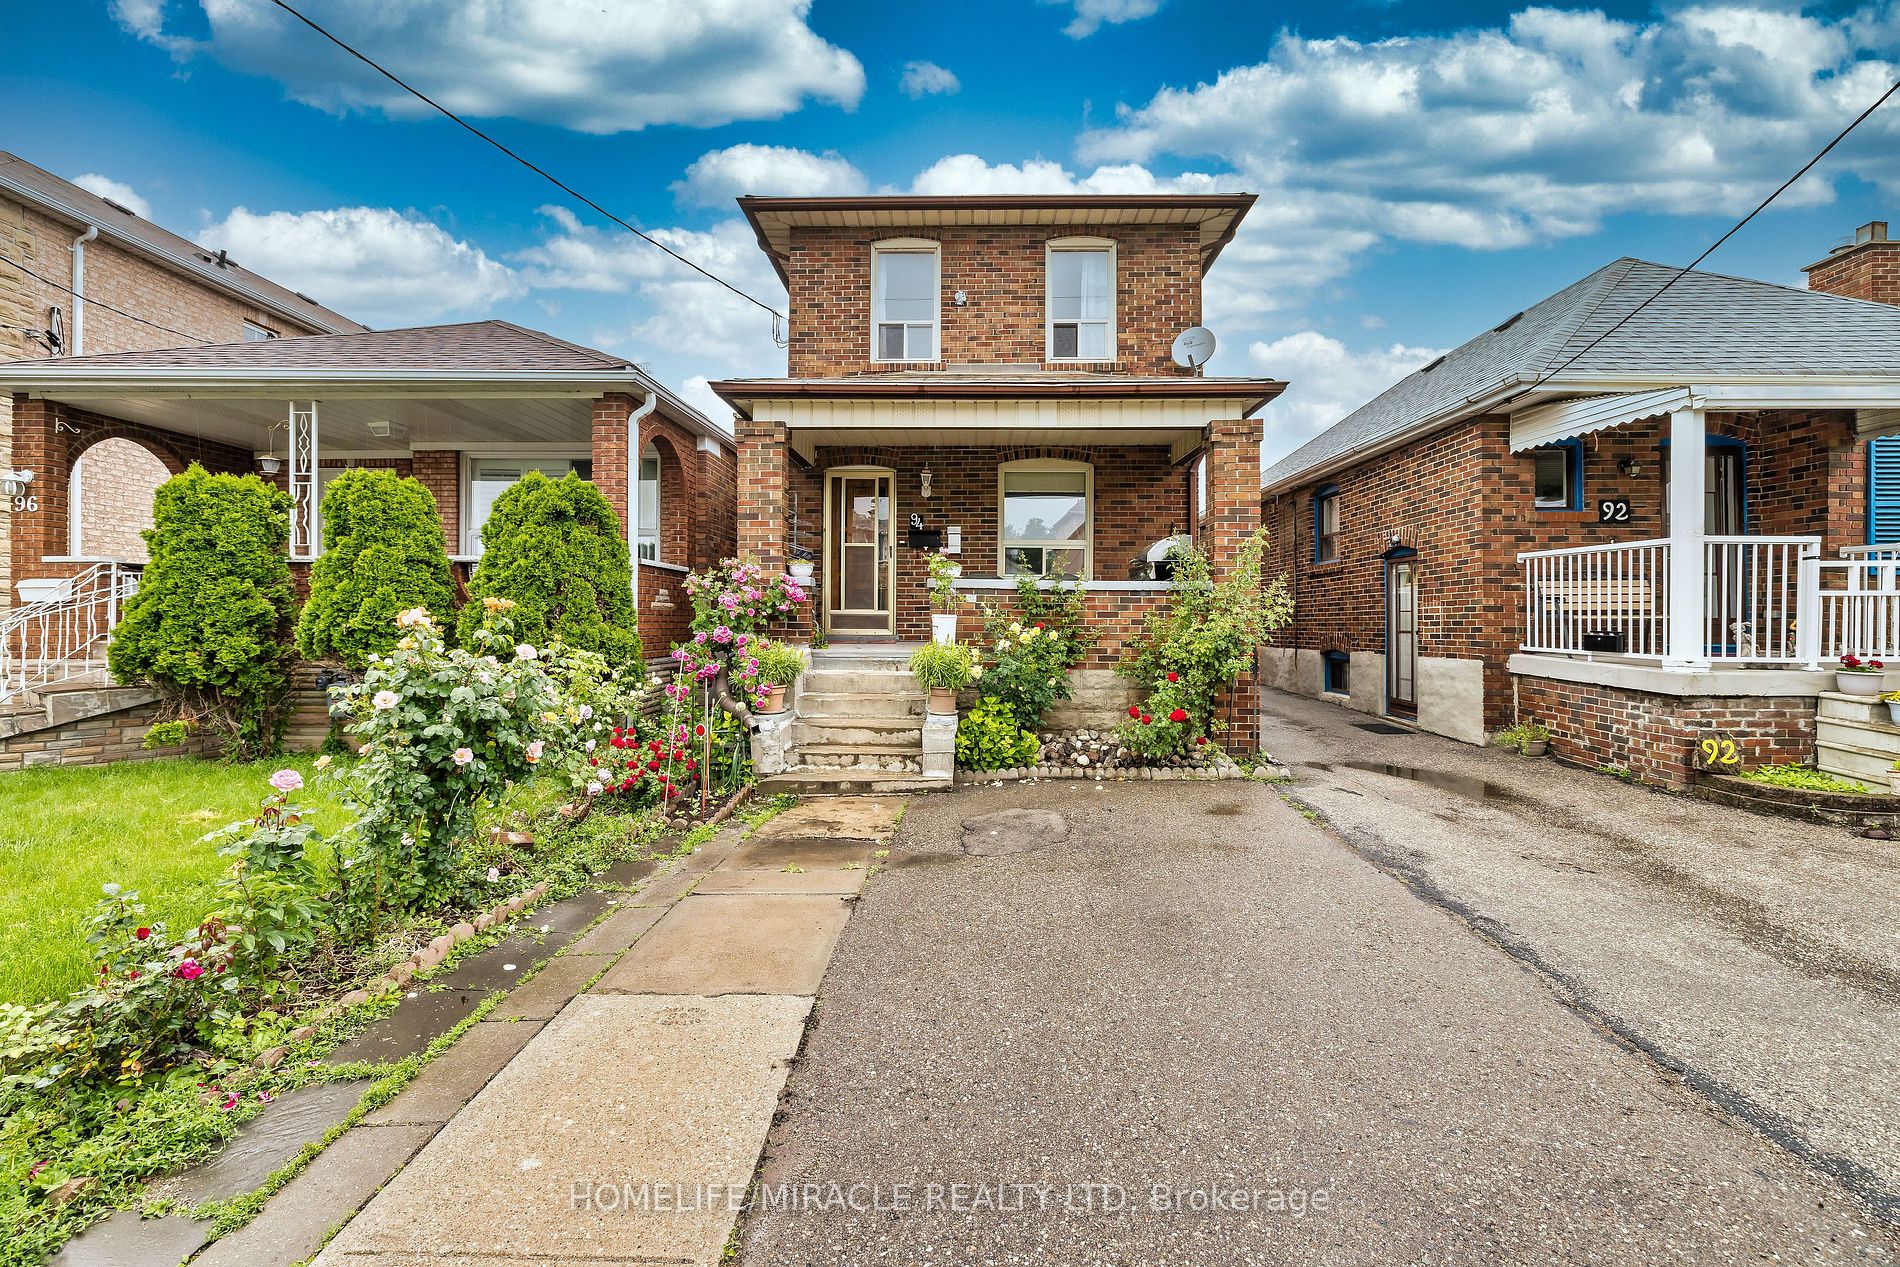 Detached house for sale at 94 Ypres Rd N Toronto Ontario